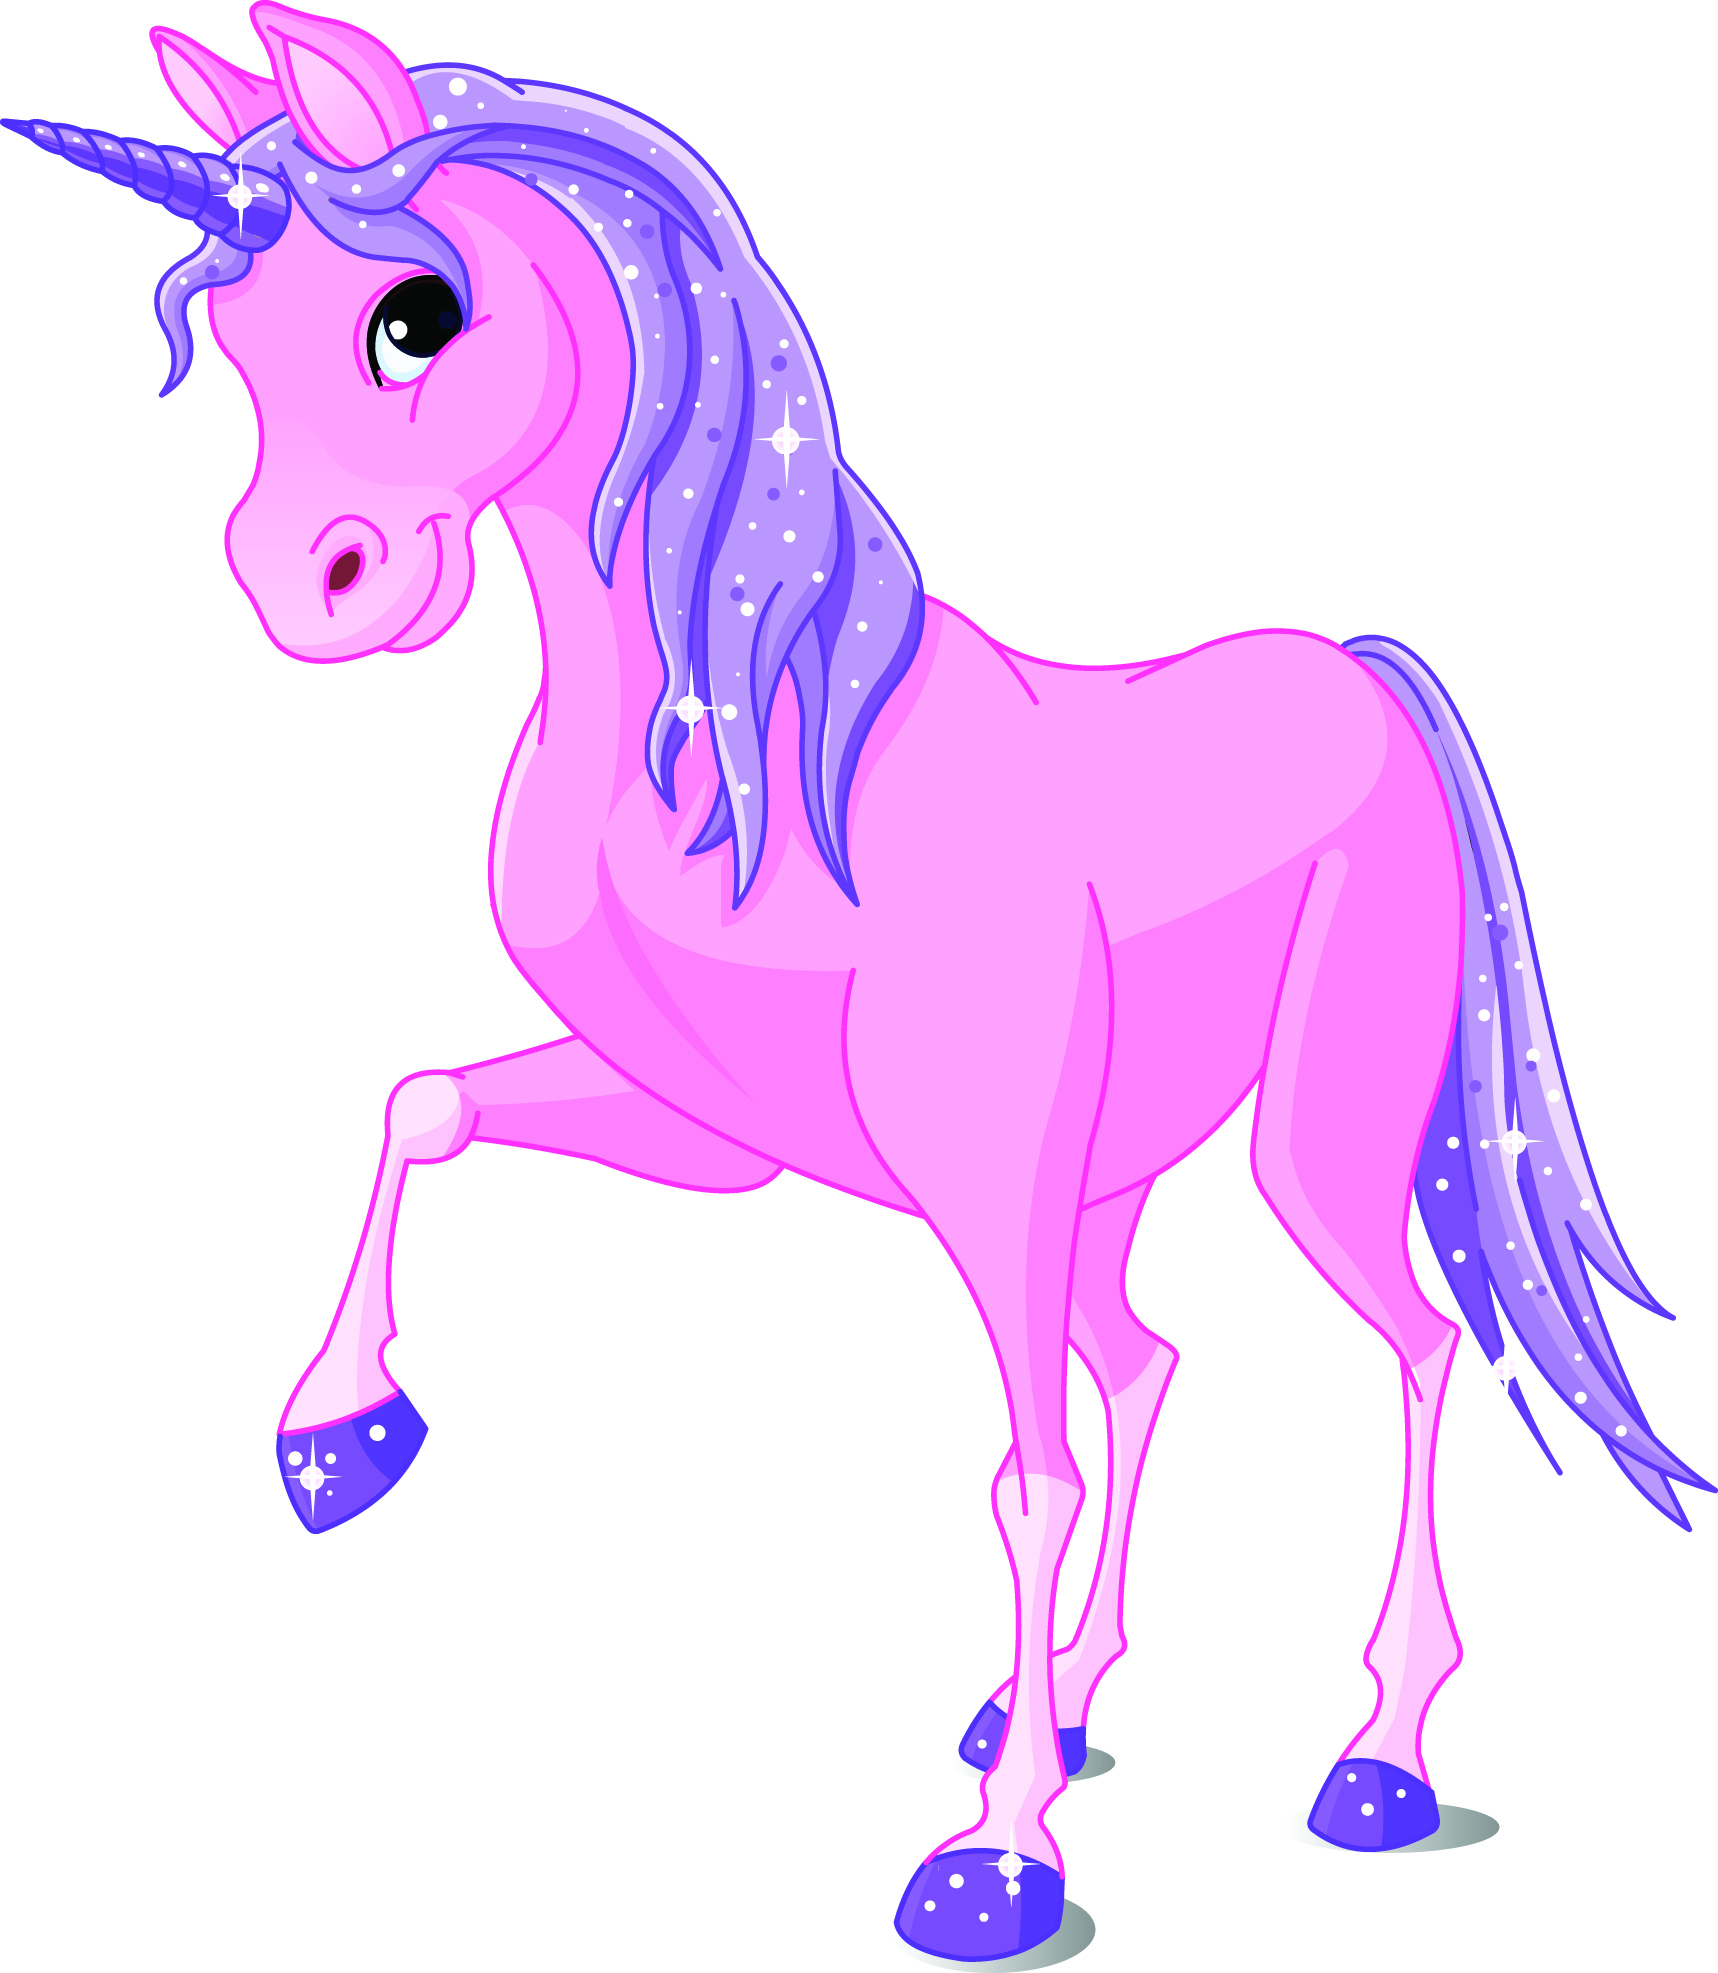 unicorn cartoon images Free cliparts that you can download to you